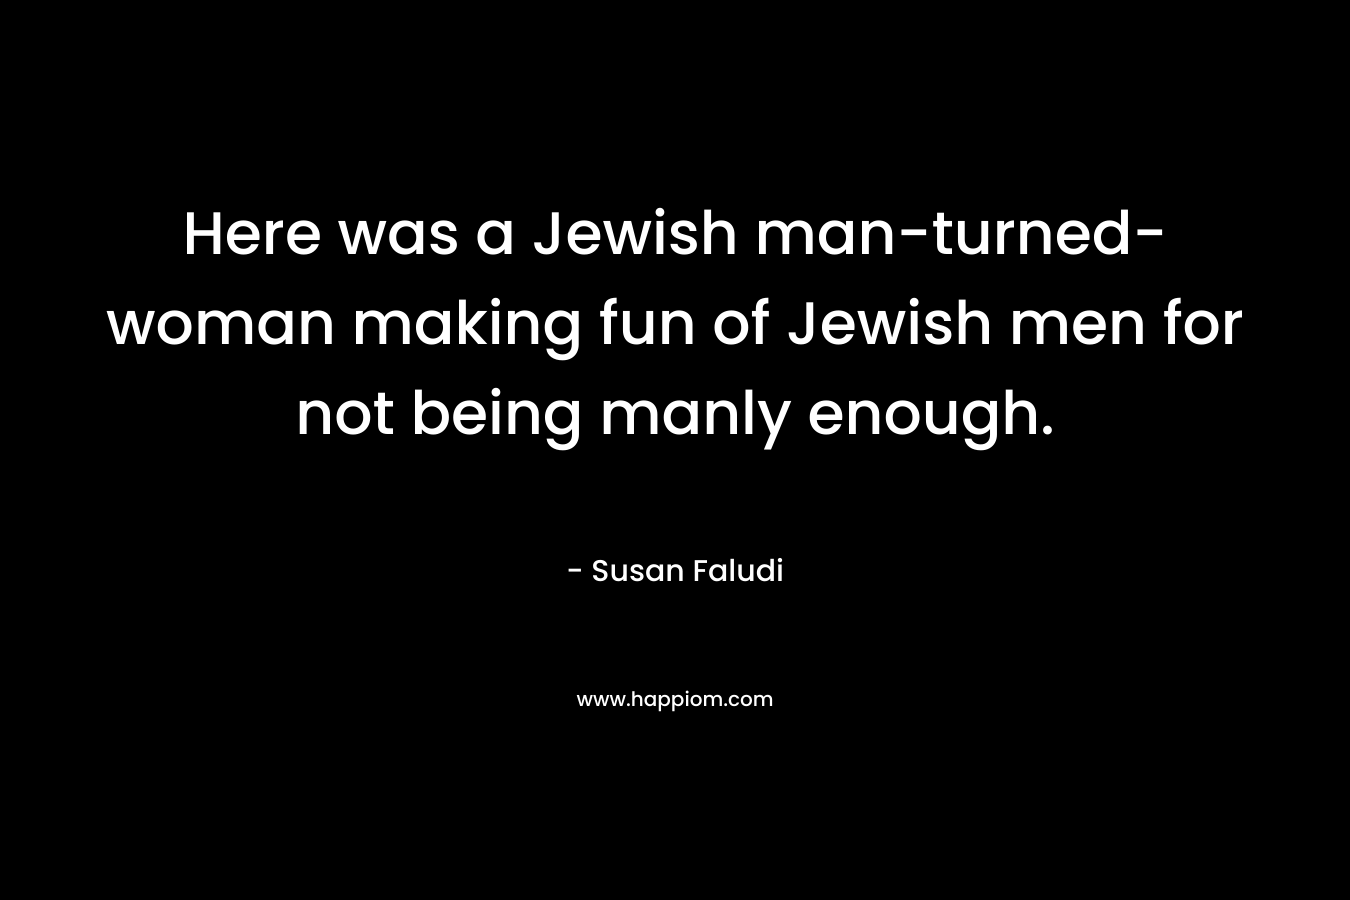 Here was a Jewish man-turned-woman making fun of Jewish men for not being manly enough.